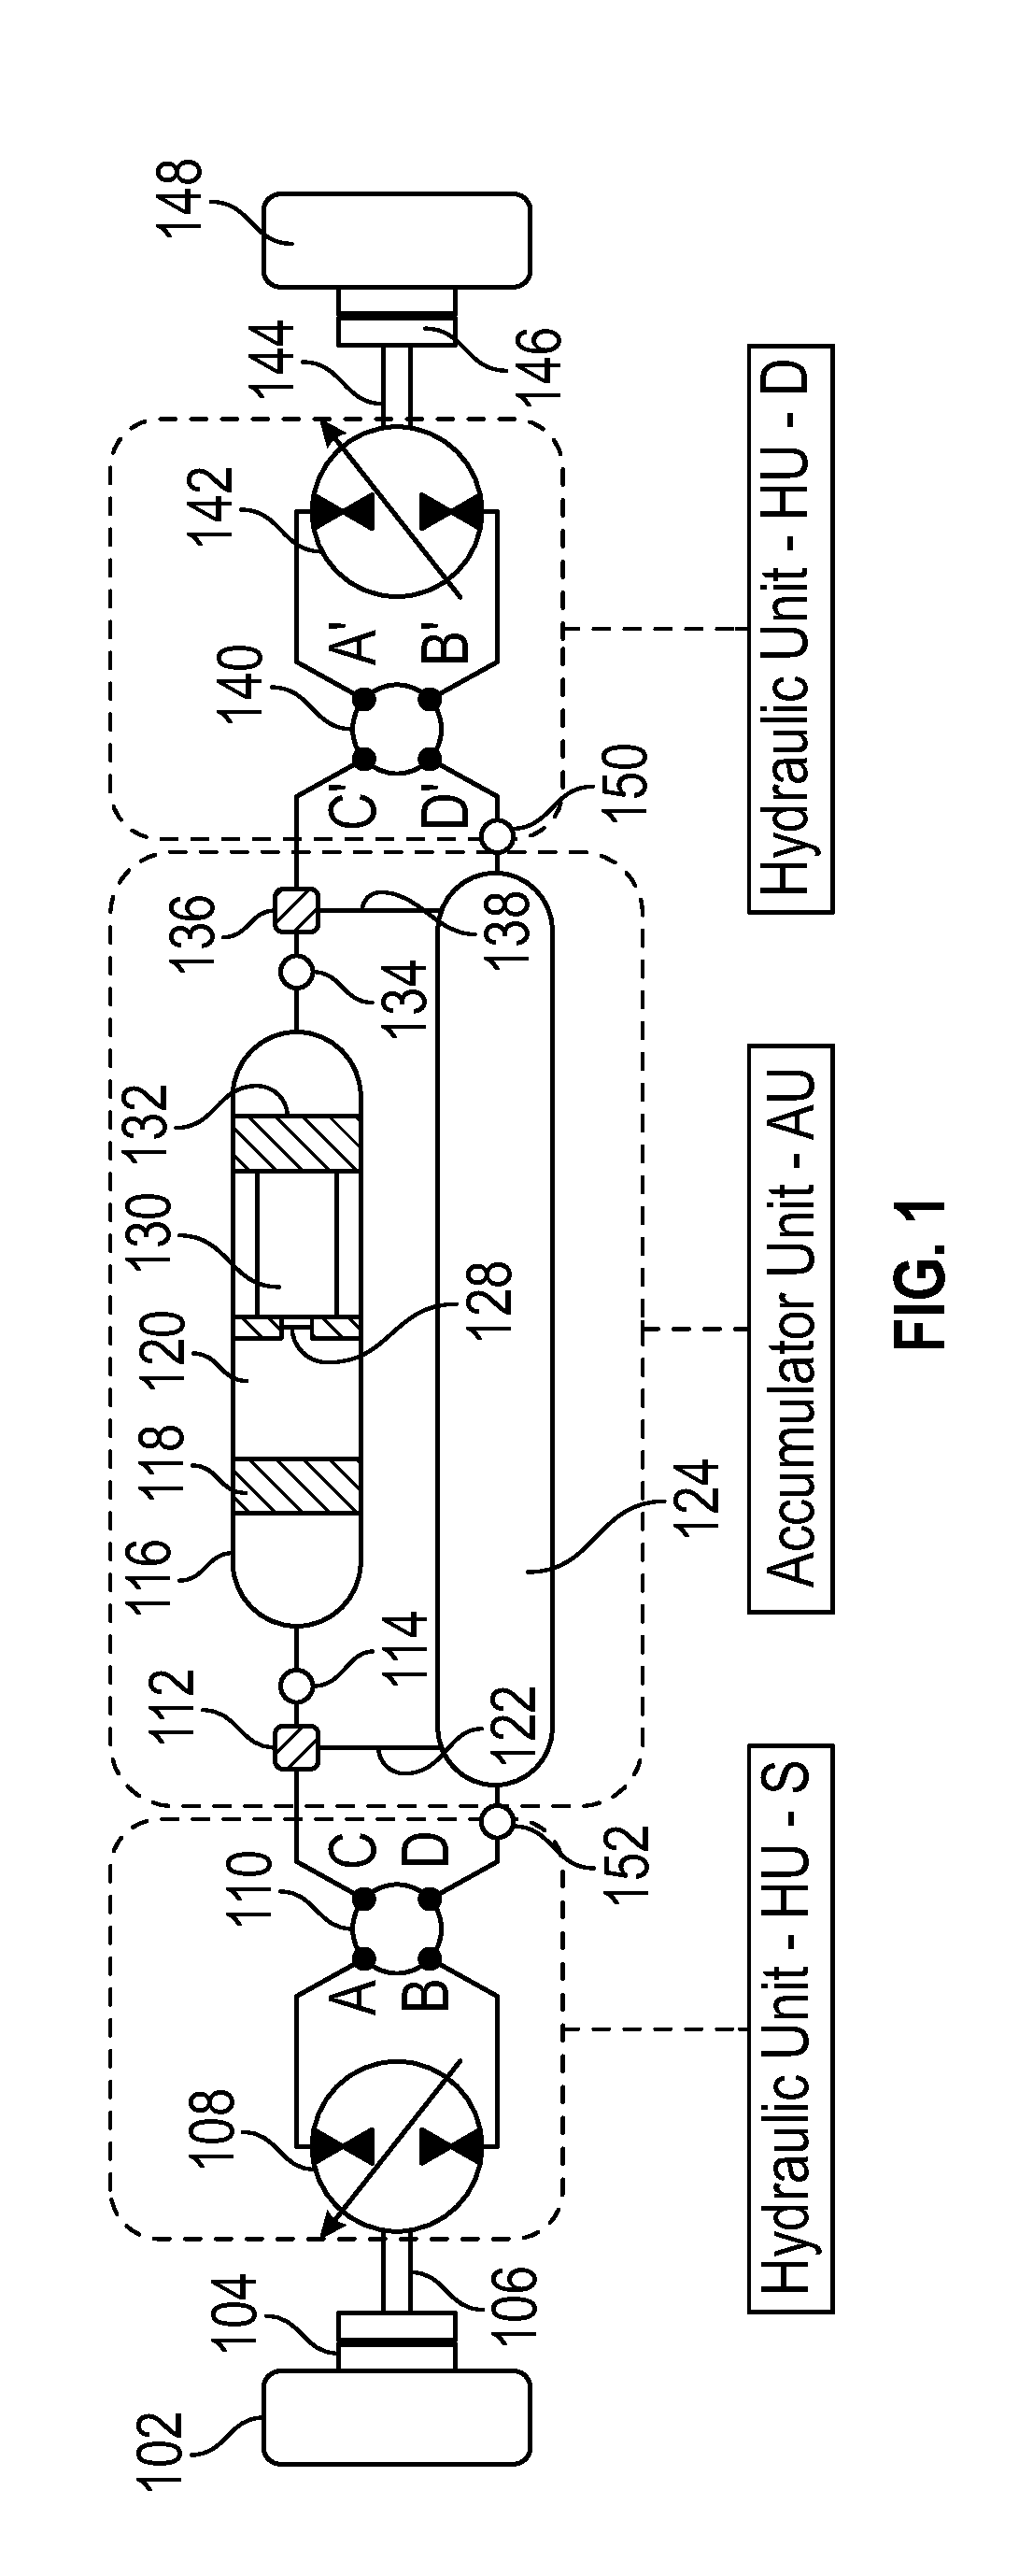 Integrated energy conversion, transfer and storage system